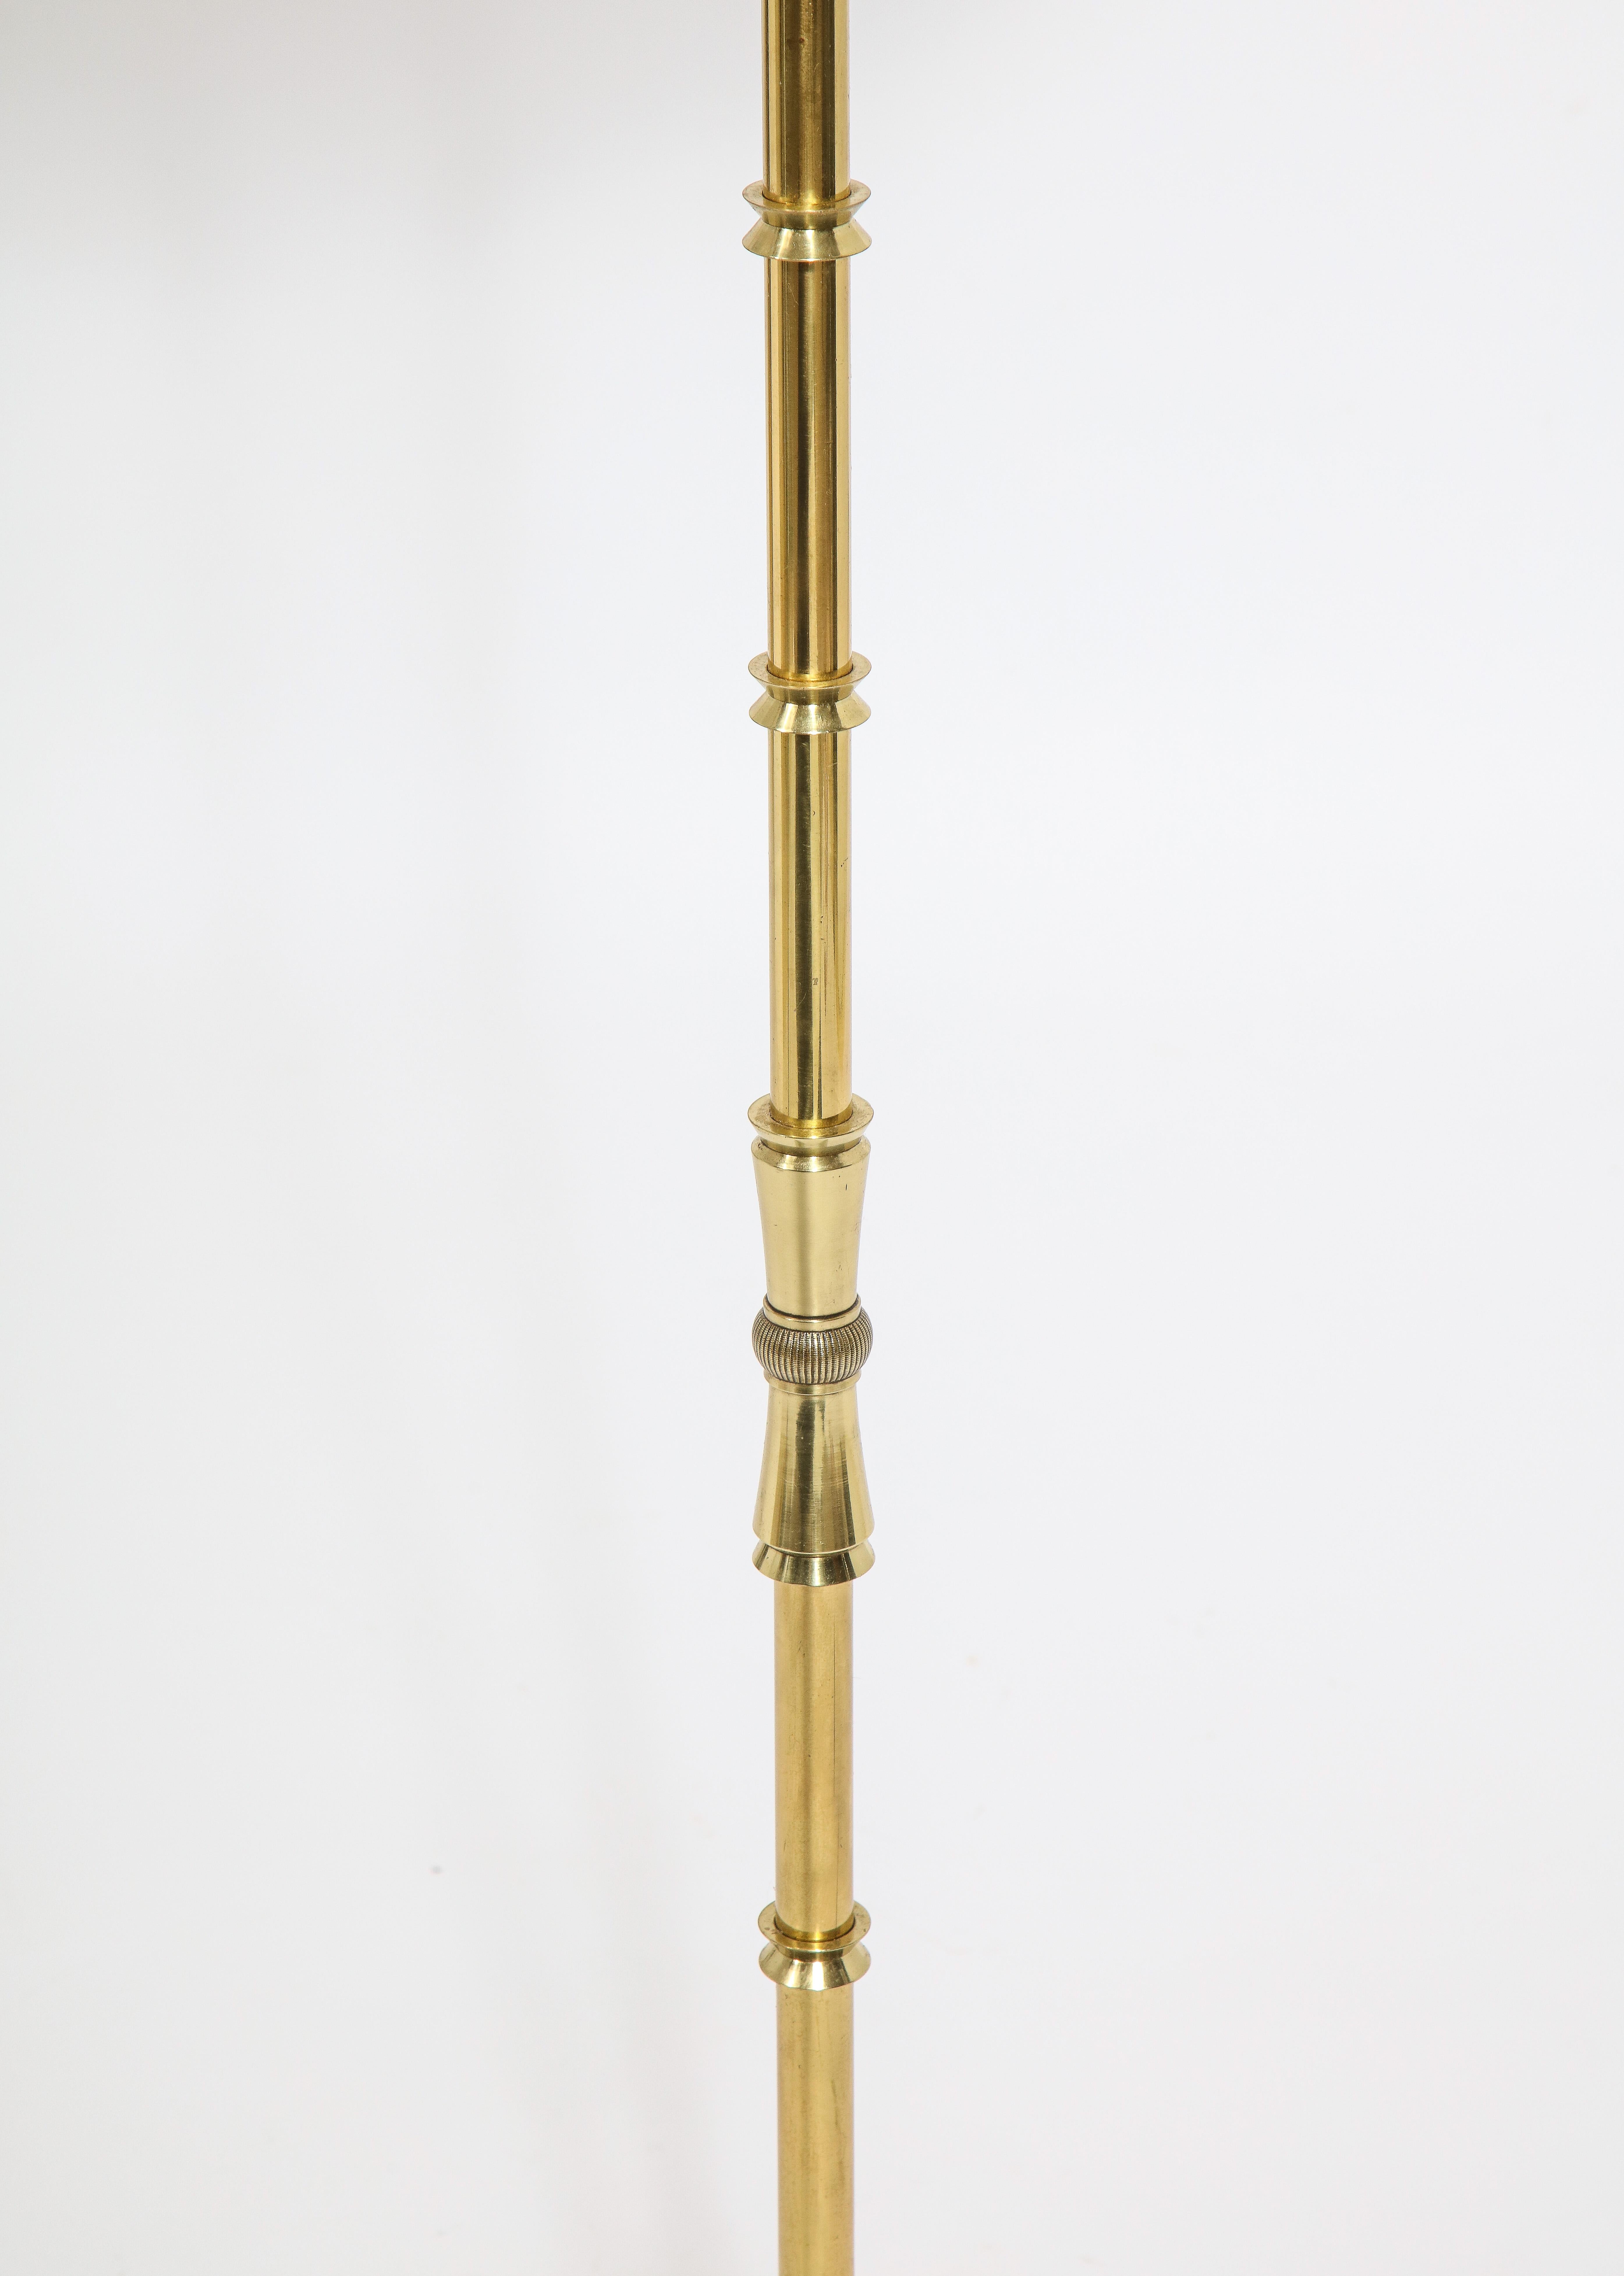 Elegant neoclassic floor lamp with a stylized faux bamboo stem resting on a solid cast triangular base ending in curved feet. Shade is for photographic purposes.